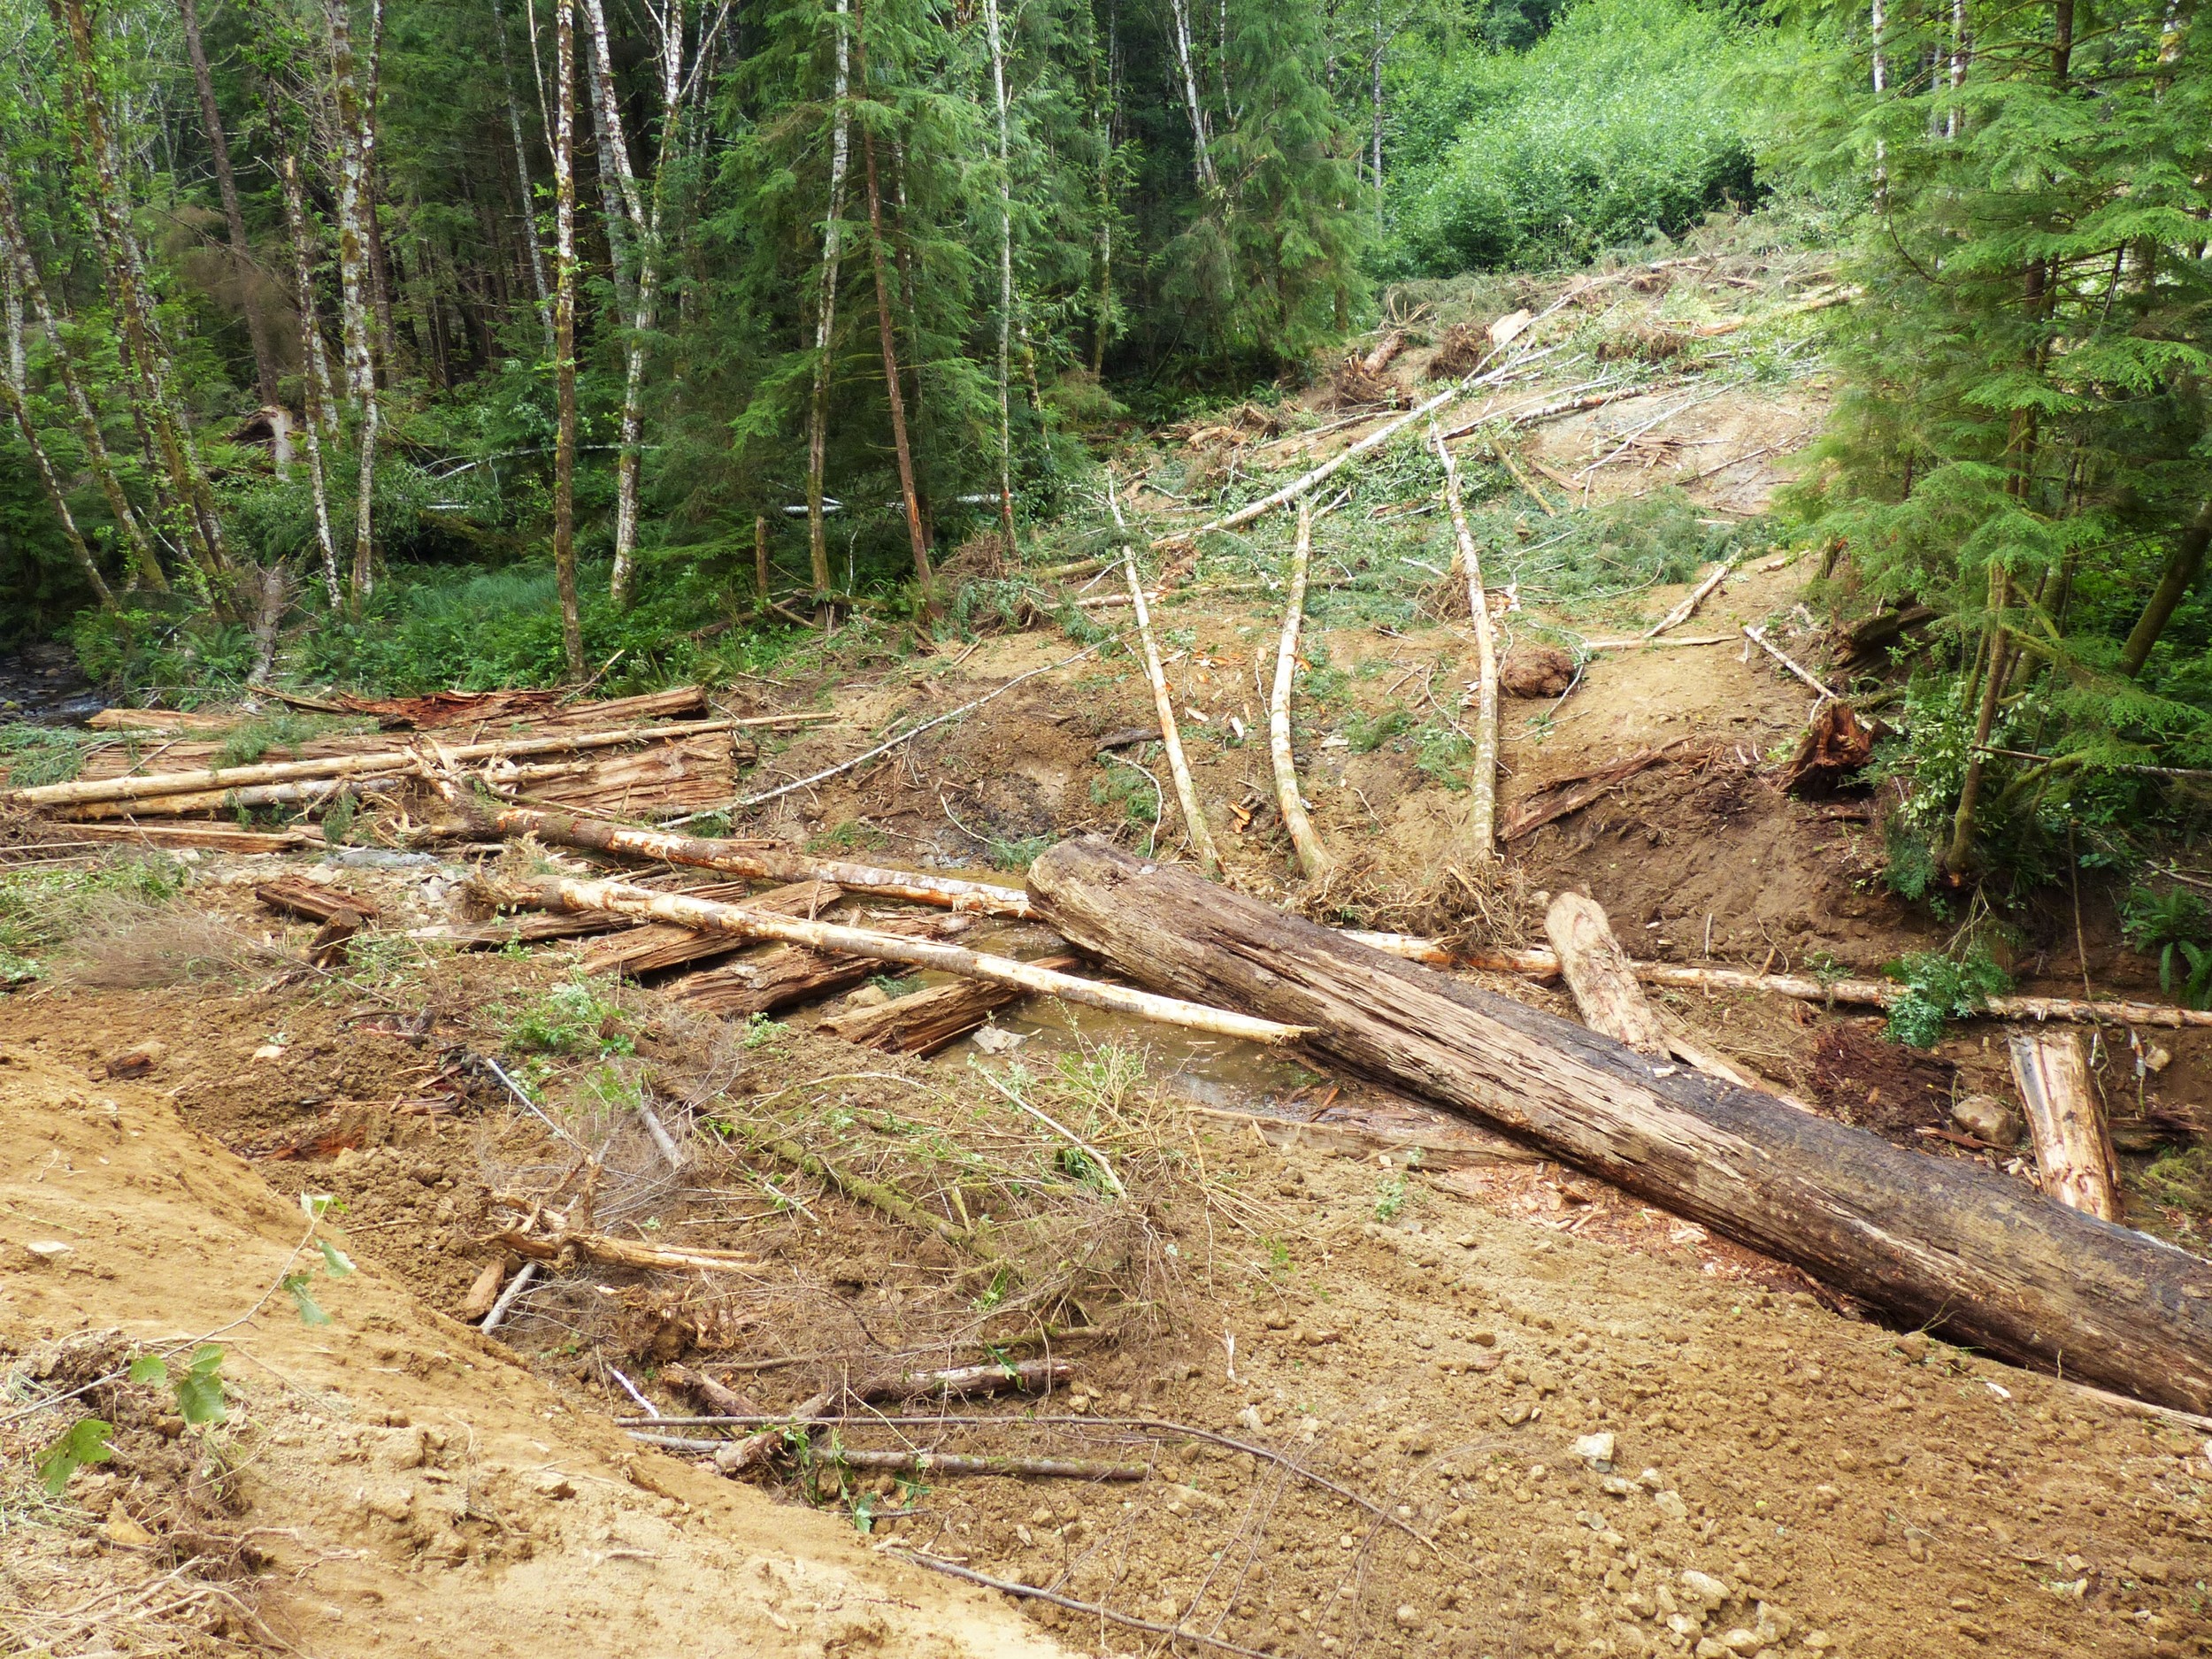  After the bridge was deconstructed, the timbers were used to create log jams and foster stream structure. 